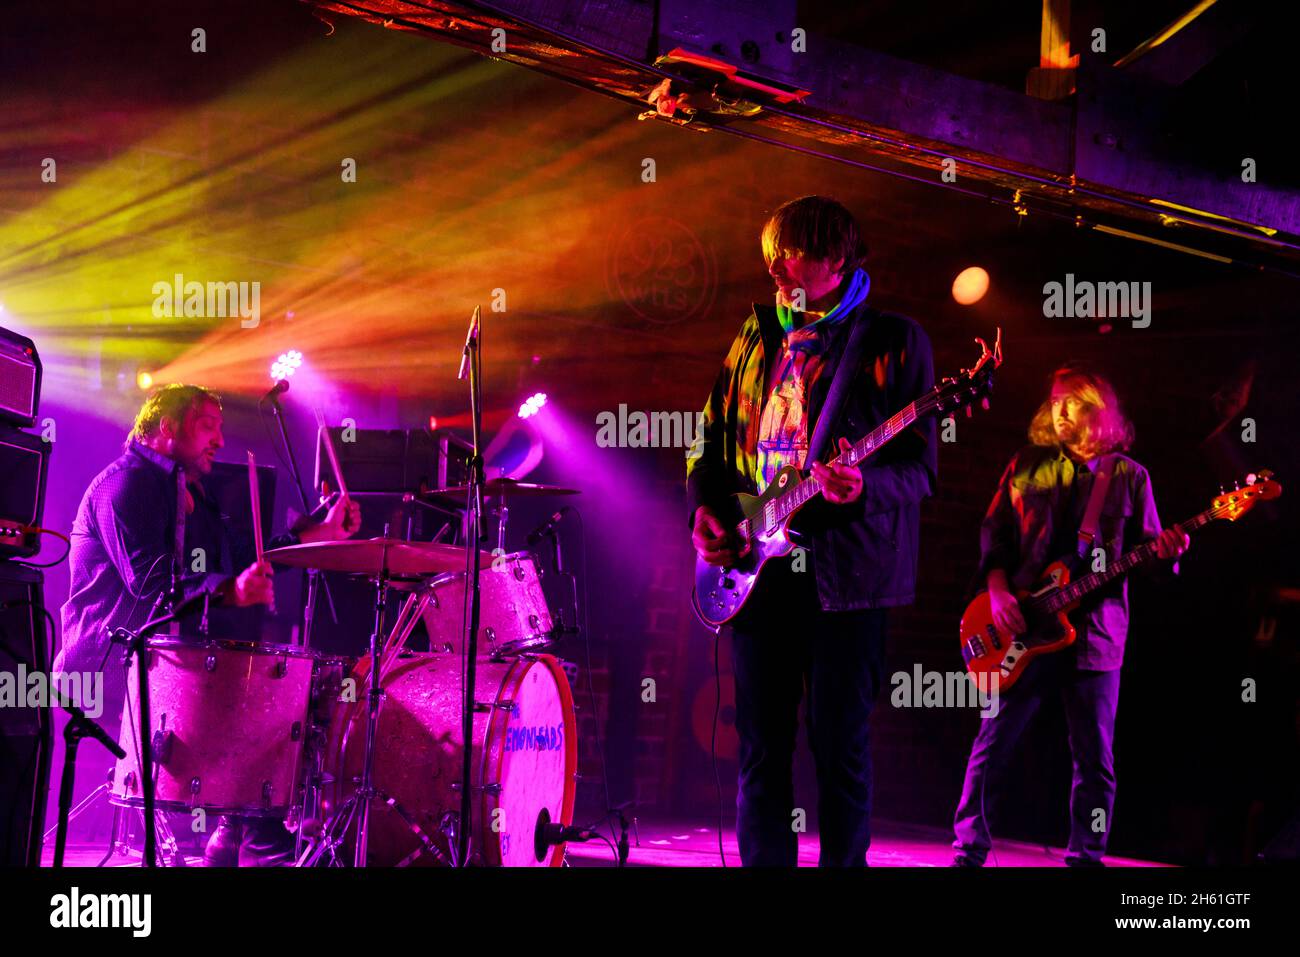 BLOOMINGTON, UNITED STATES - 2021/11/10: Evan Dando fronts the Lemonheads during a performance at the Bluebird, Wednesday, November 10, 2021 in Bloomington, Ind. The Lemonheads are currently a few days into a tour. (Photo by Jeremy Hogan/The Bloomingtonian) Stock Photo